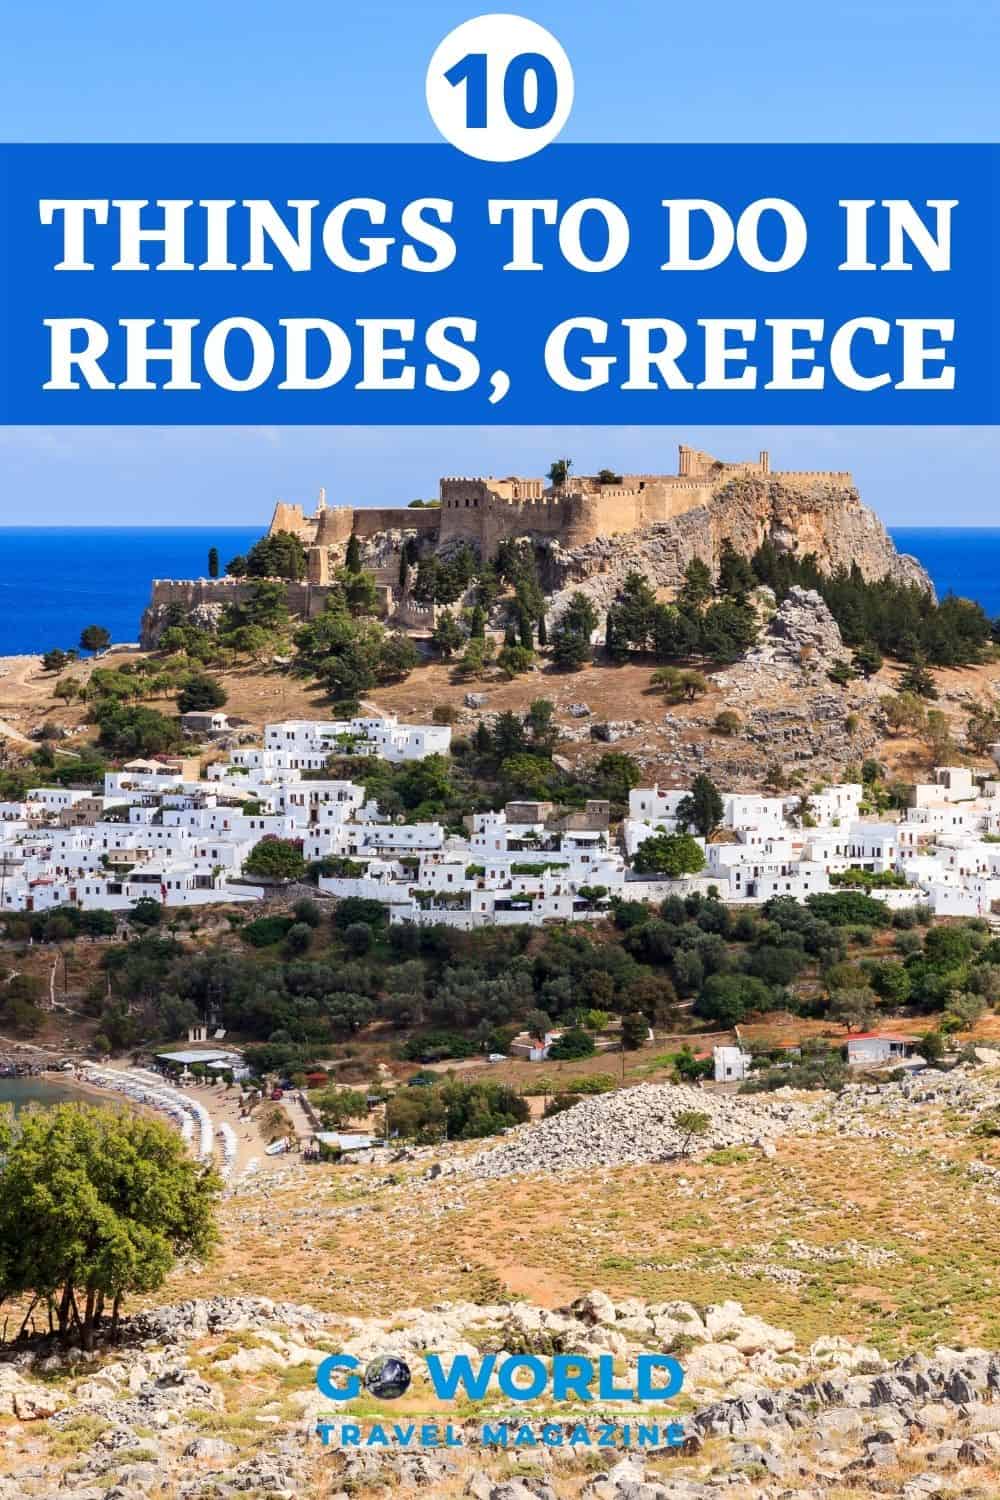 The Greek Island of Rhodes is a top beach destination. However, there are many more things to do in Rhodes from historic sites to butterflies. #Greece #Rhodes